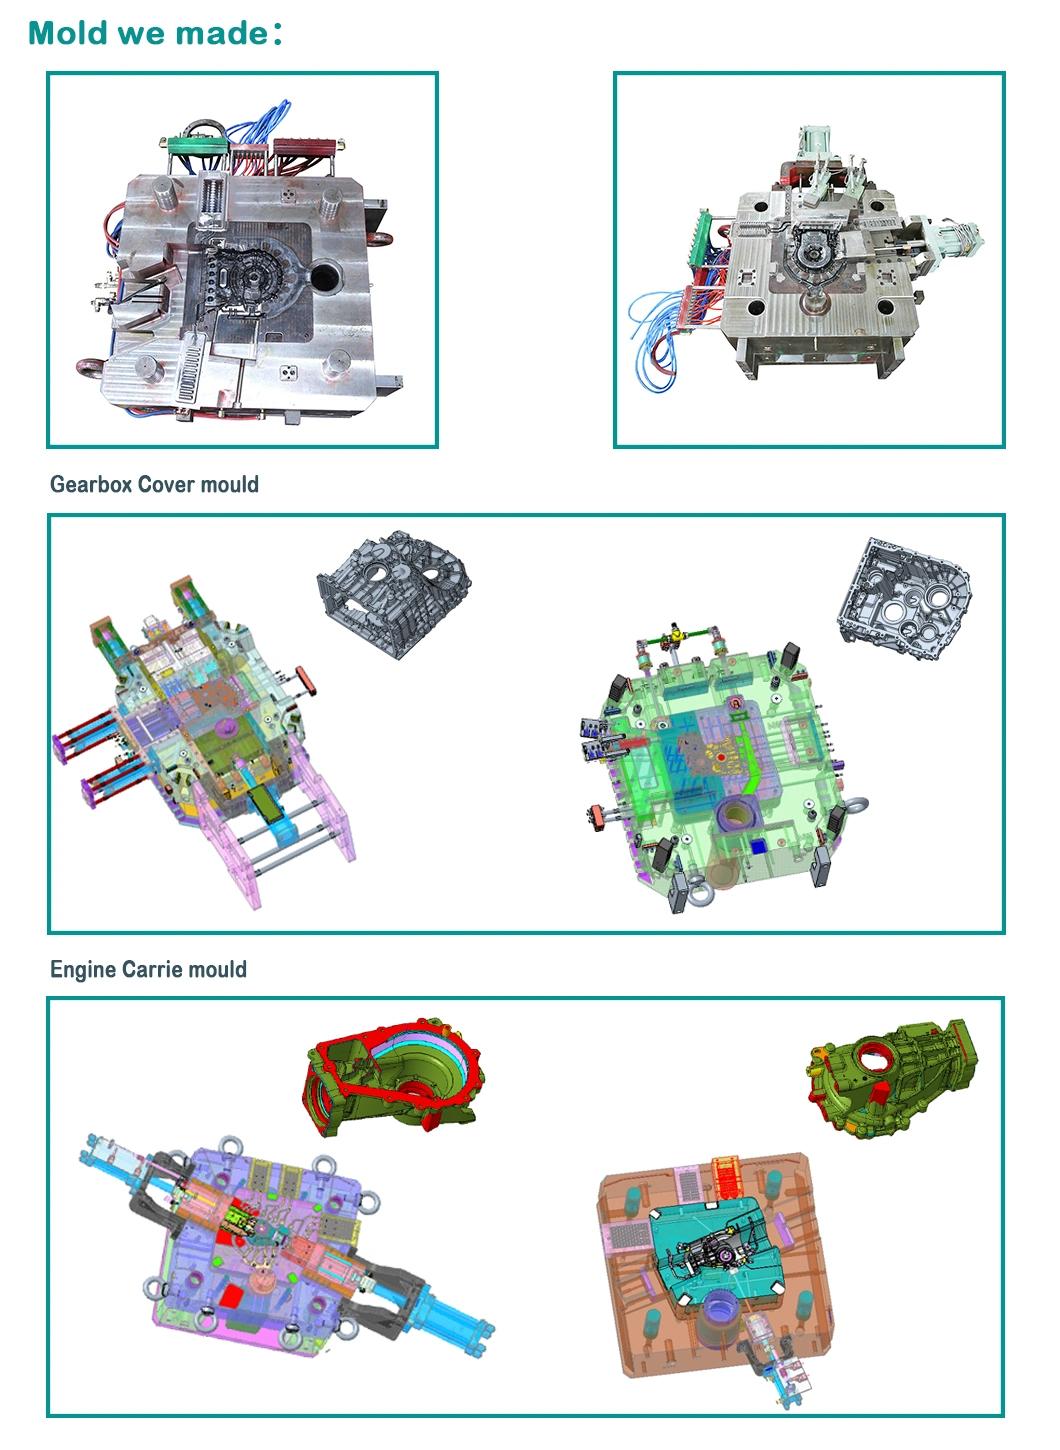 20 Years Mould Maker Free Sample High Quality Customized Complex Die Casting Die Die Casting Mould for Vehicle Chain Cover with Good Durability